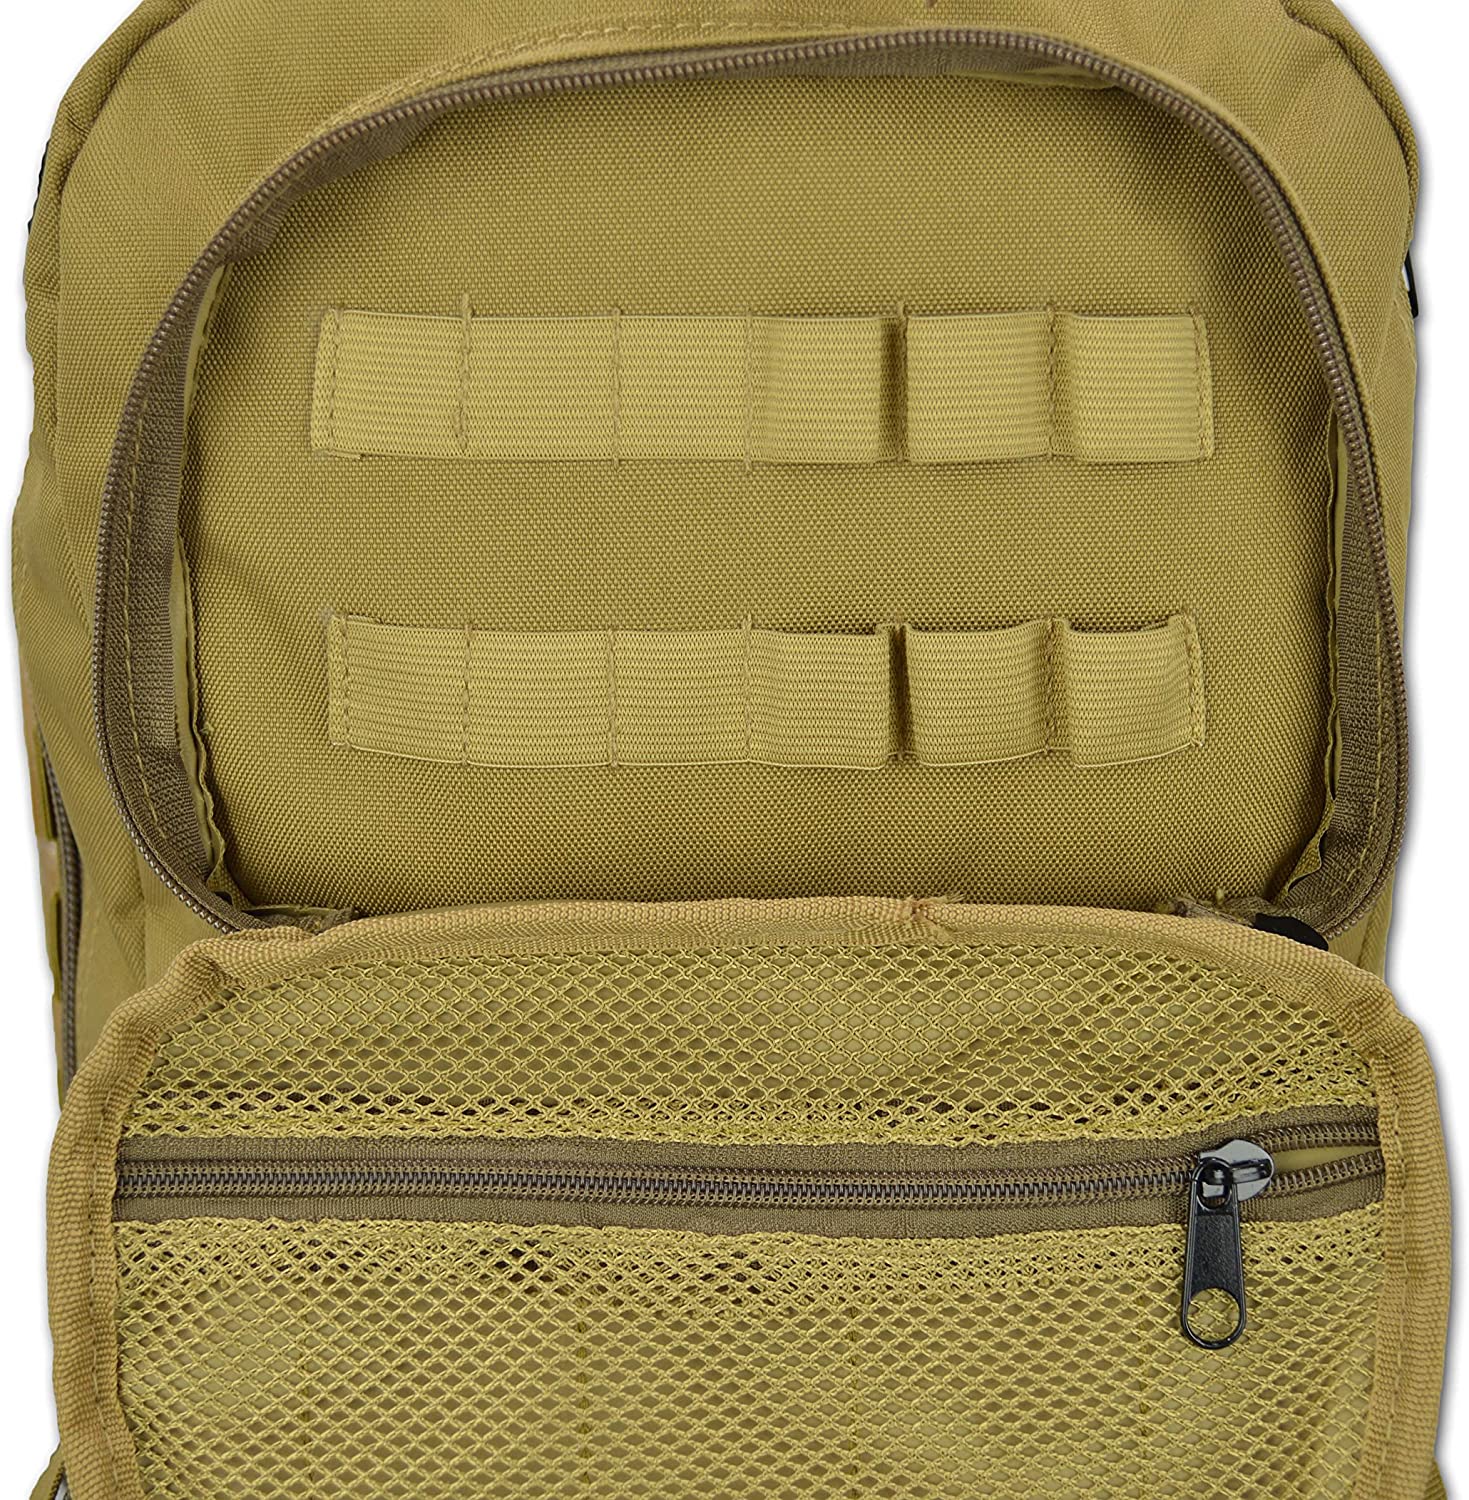 Lightning X Premium Tactical Medic Backpack w/ Modular Pouches & Hydration Port - image 5 of 8